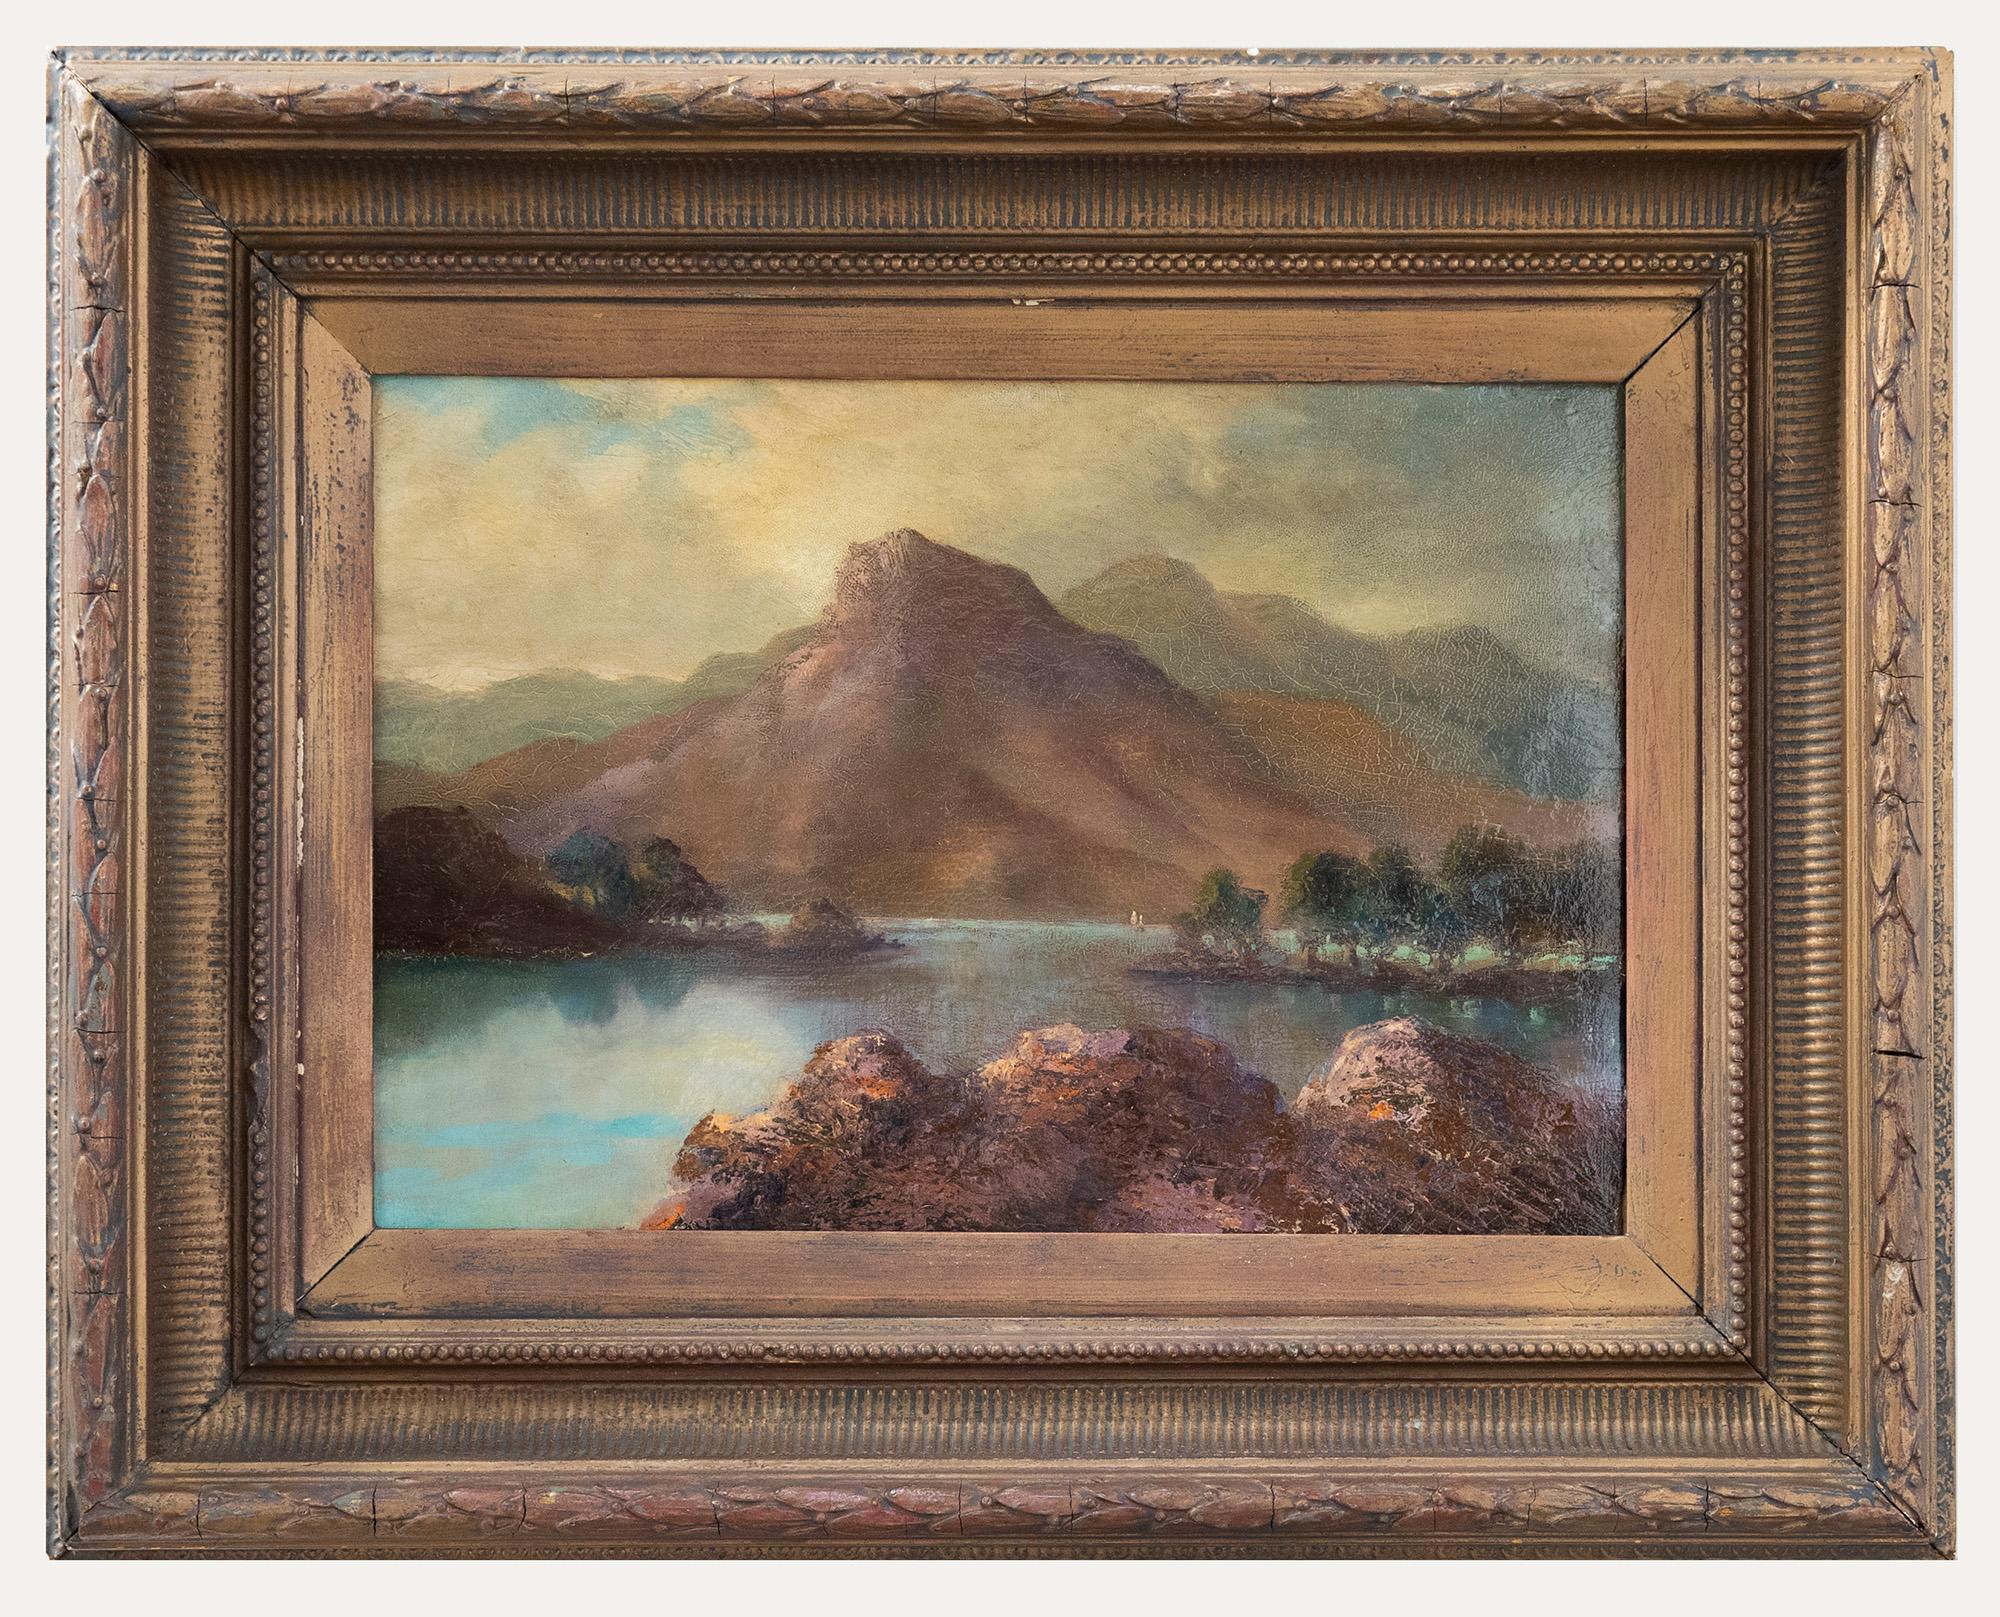 Unknown Landscape Painting - C. Milne - Framed Late 19th Century Oil, Loch Ericht